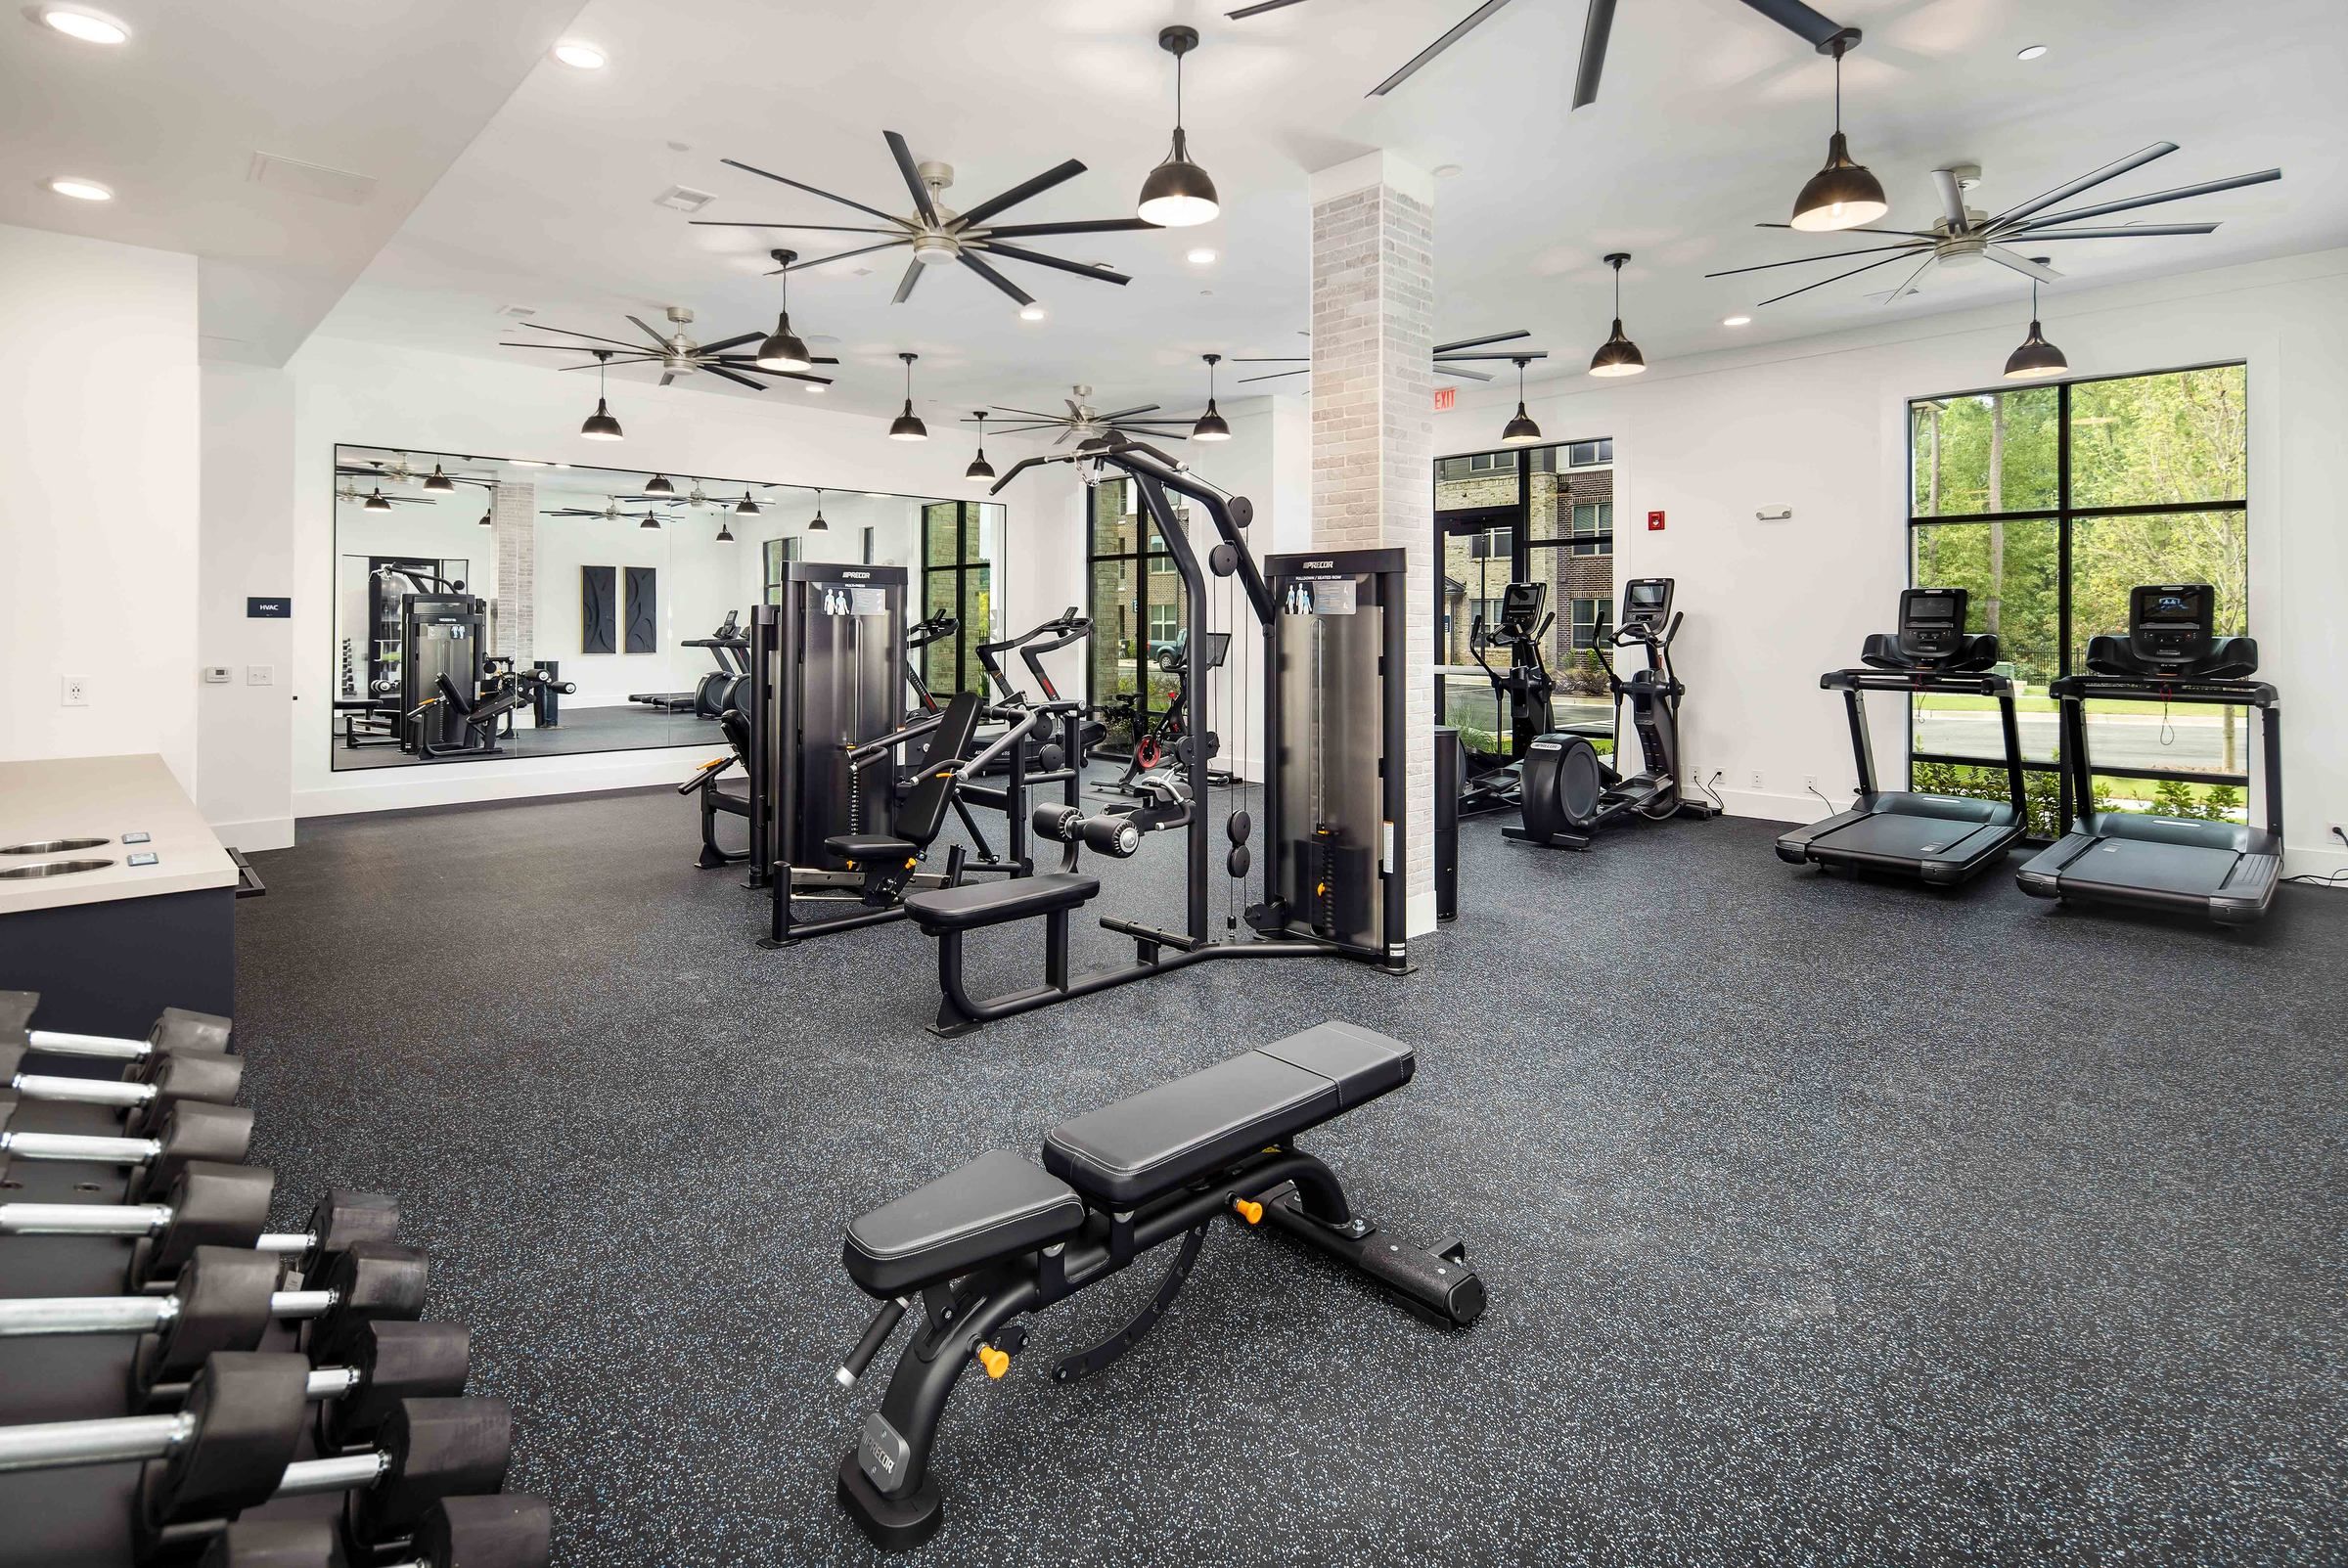 The fitness center at Alta Ashley Park, equipped with an array of black exercise machines, free weights, and multiple ceiling fans, set against a backdrop of large windows.